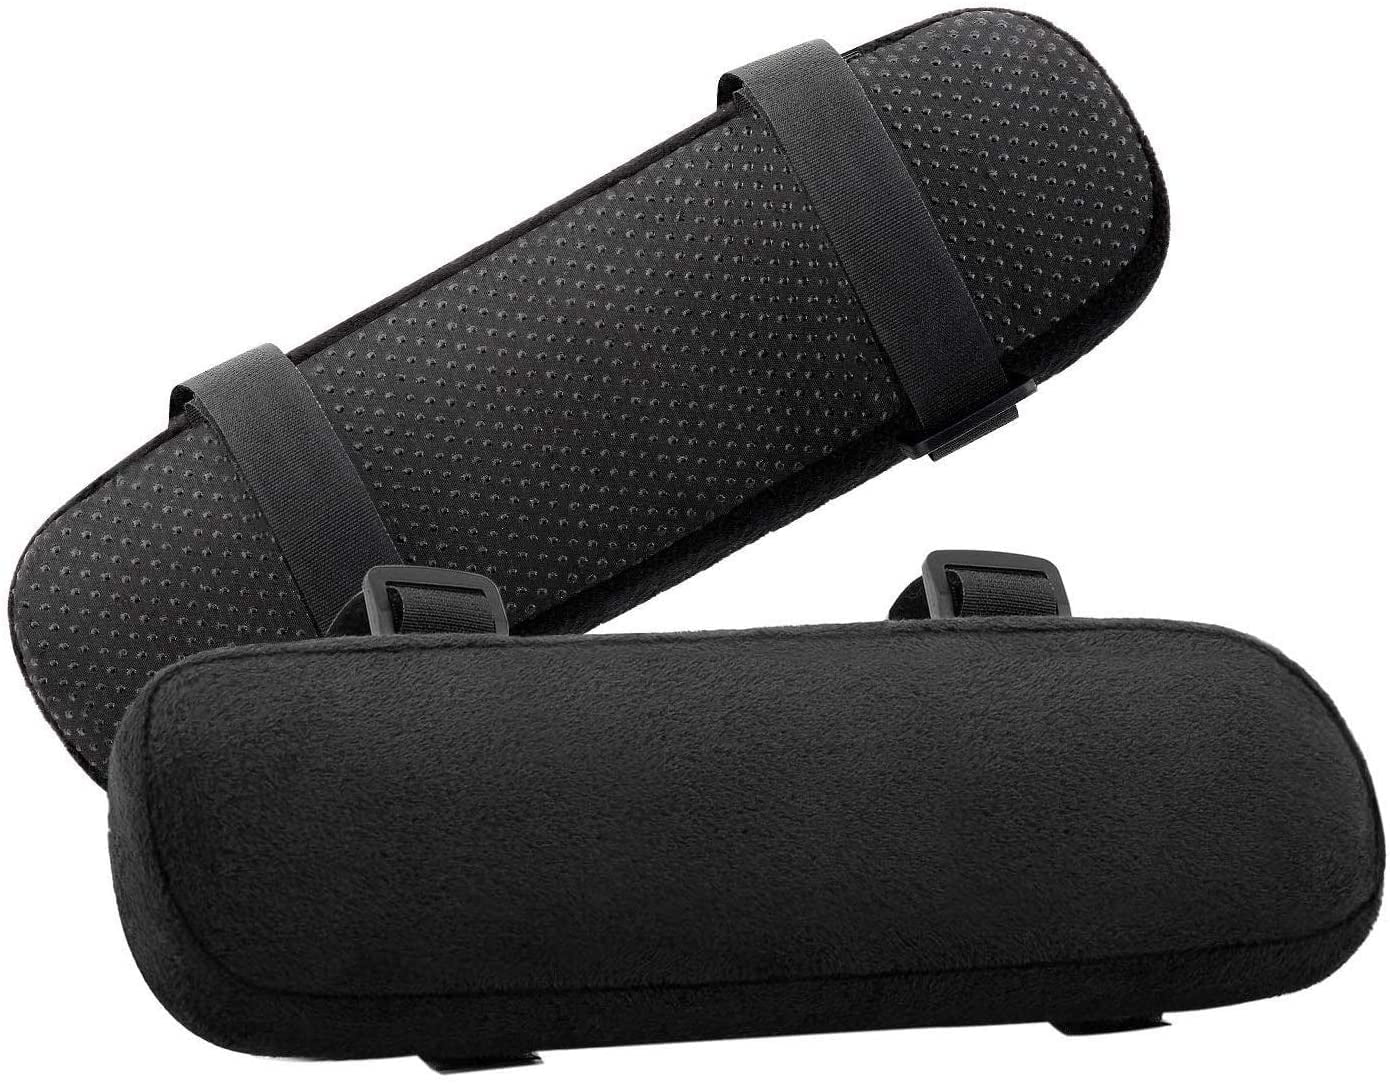 Universal Armrest Pads: Ergonomic Memory Foam High Density Anti-Slip Arm Rest Covers 2PC Set Office Jumbo Computer Elbow Cushion Arm Pads Wheelchair Relieves Forearm Pain Fatigue Gaming 